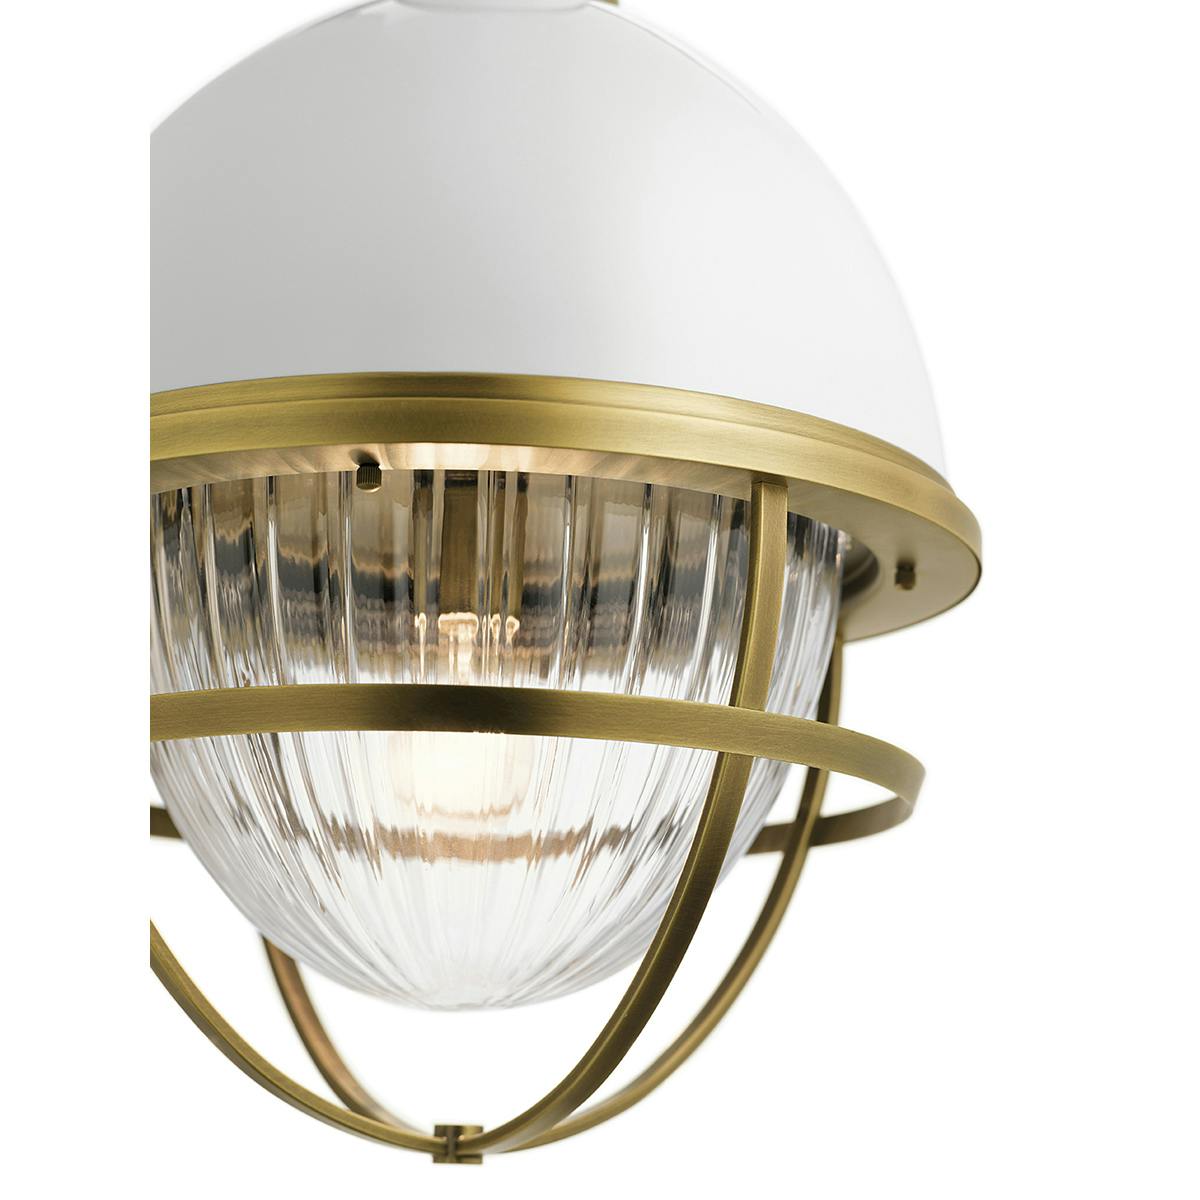 Close up view of the Tollis 23.75" 1 Light Foyer Pendant Brass on a white background